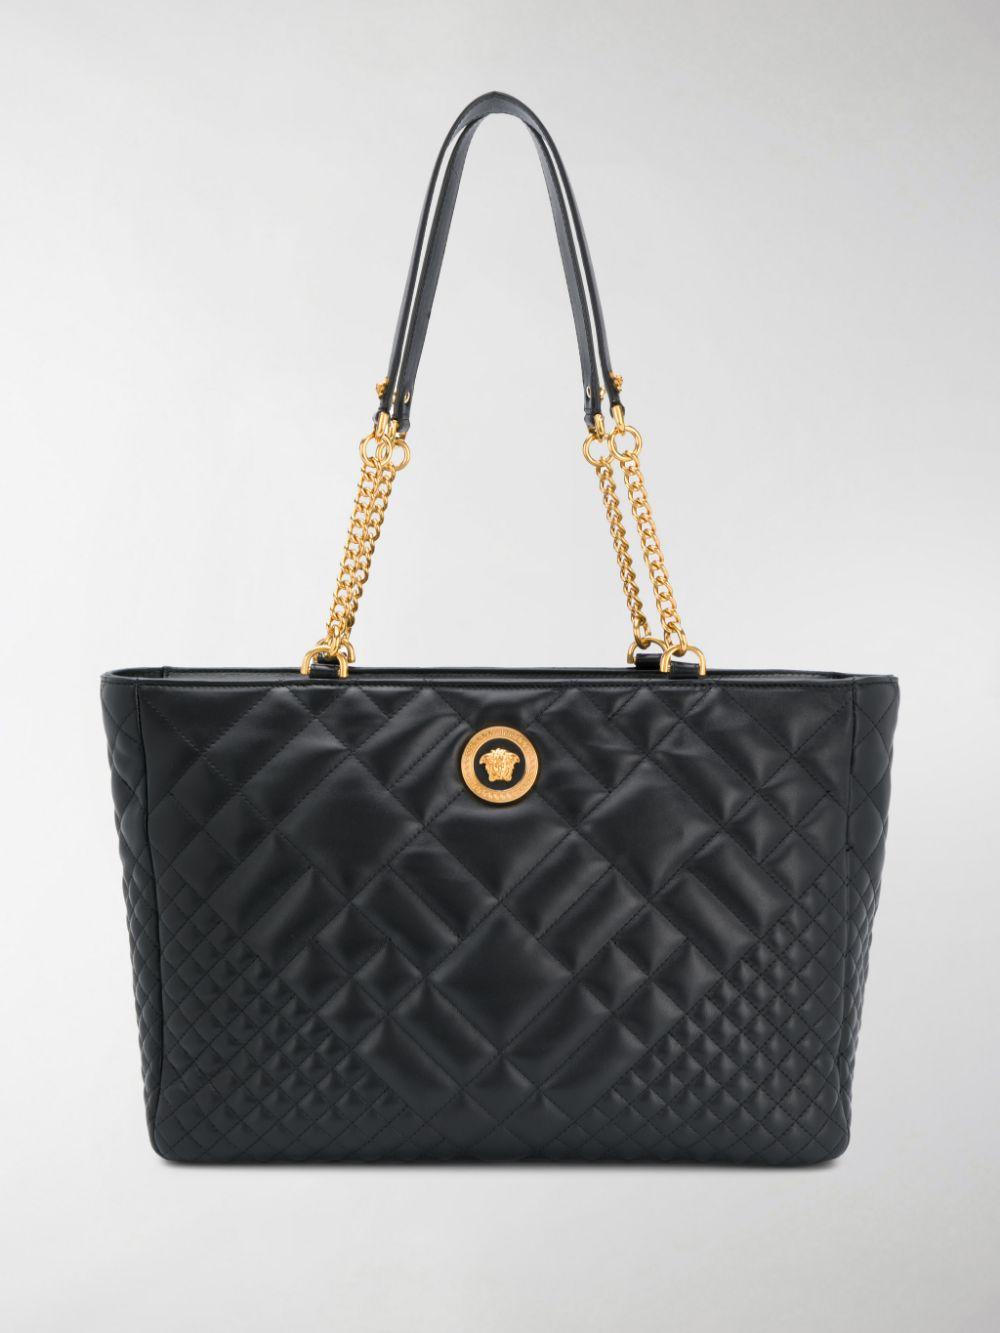 Versace Medusa Quilted Tote Bag in Black | Lyst